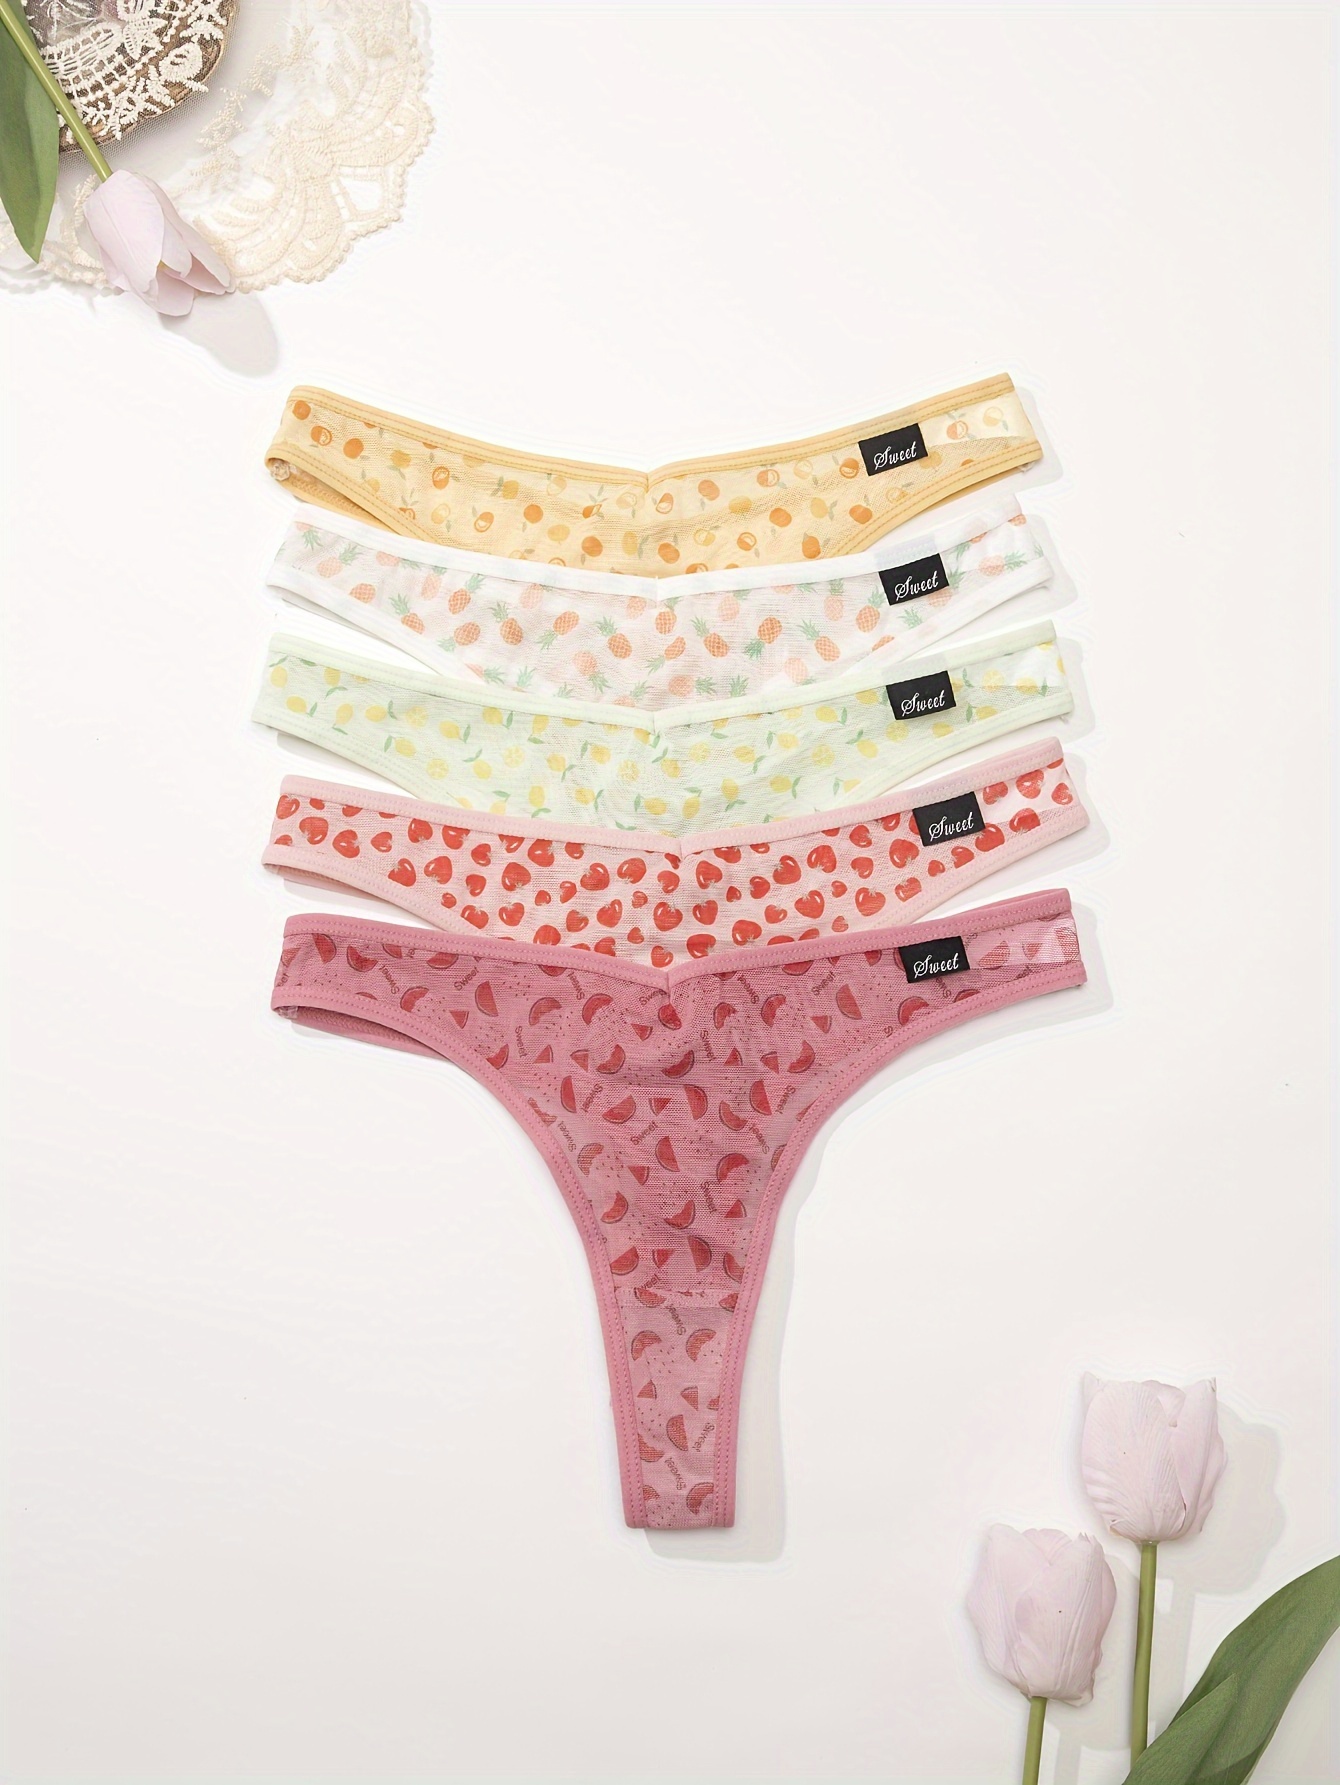 Fruit of the Loom Women's Underwear Soft and Comfy Panties